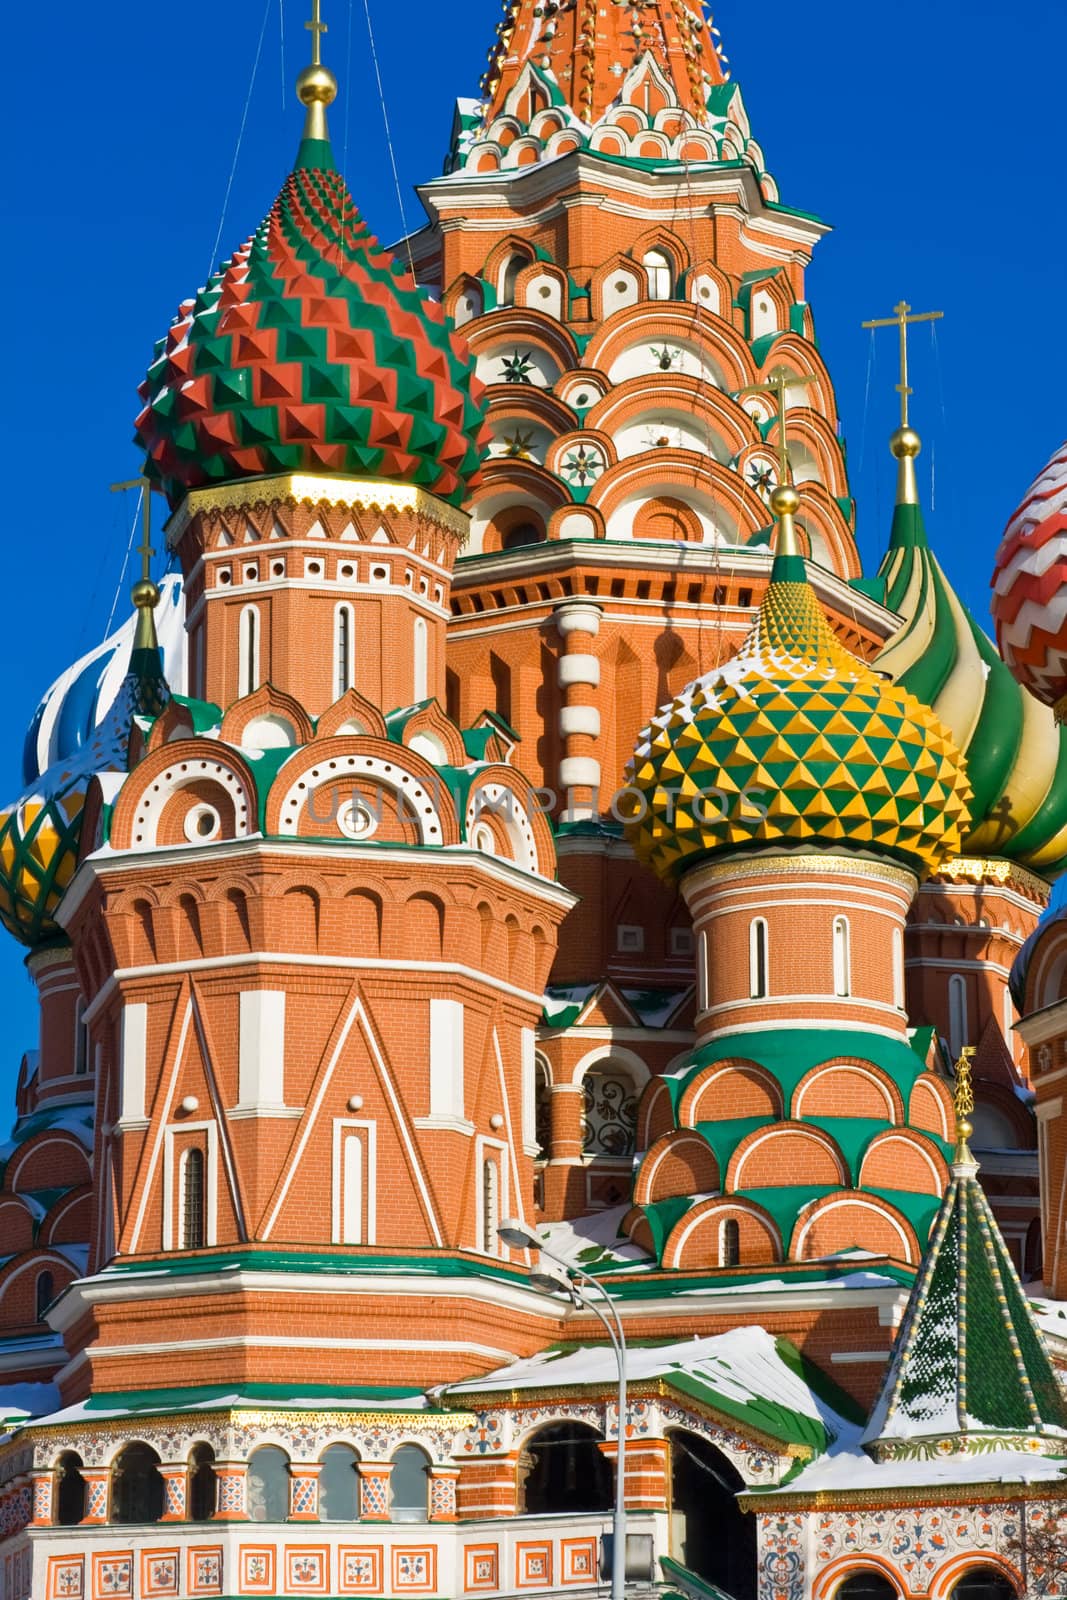 Architectural details of St Basil's Cathedral on Red Square, Moscow, Russia